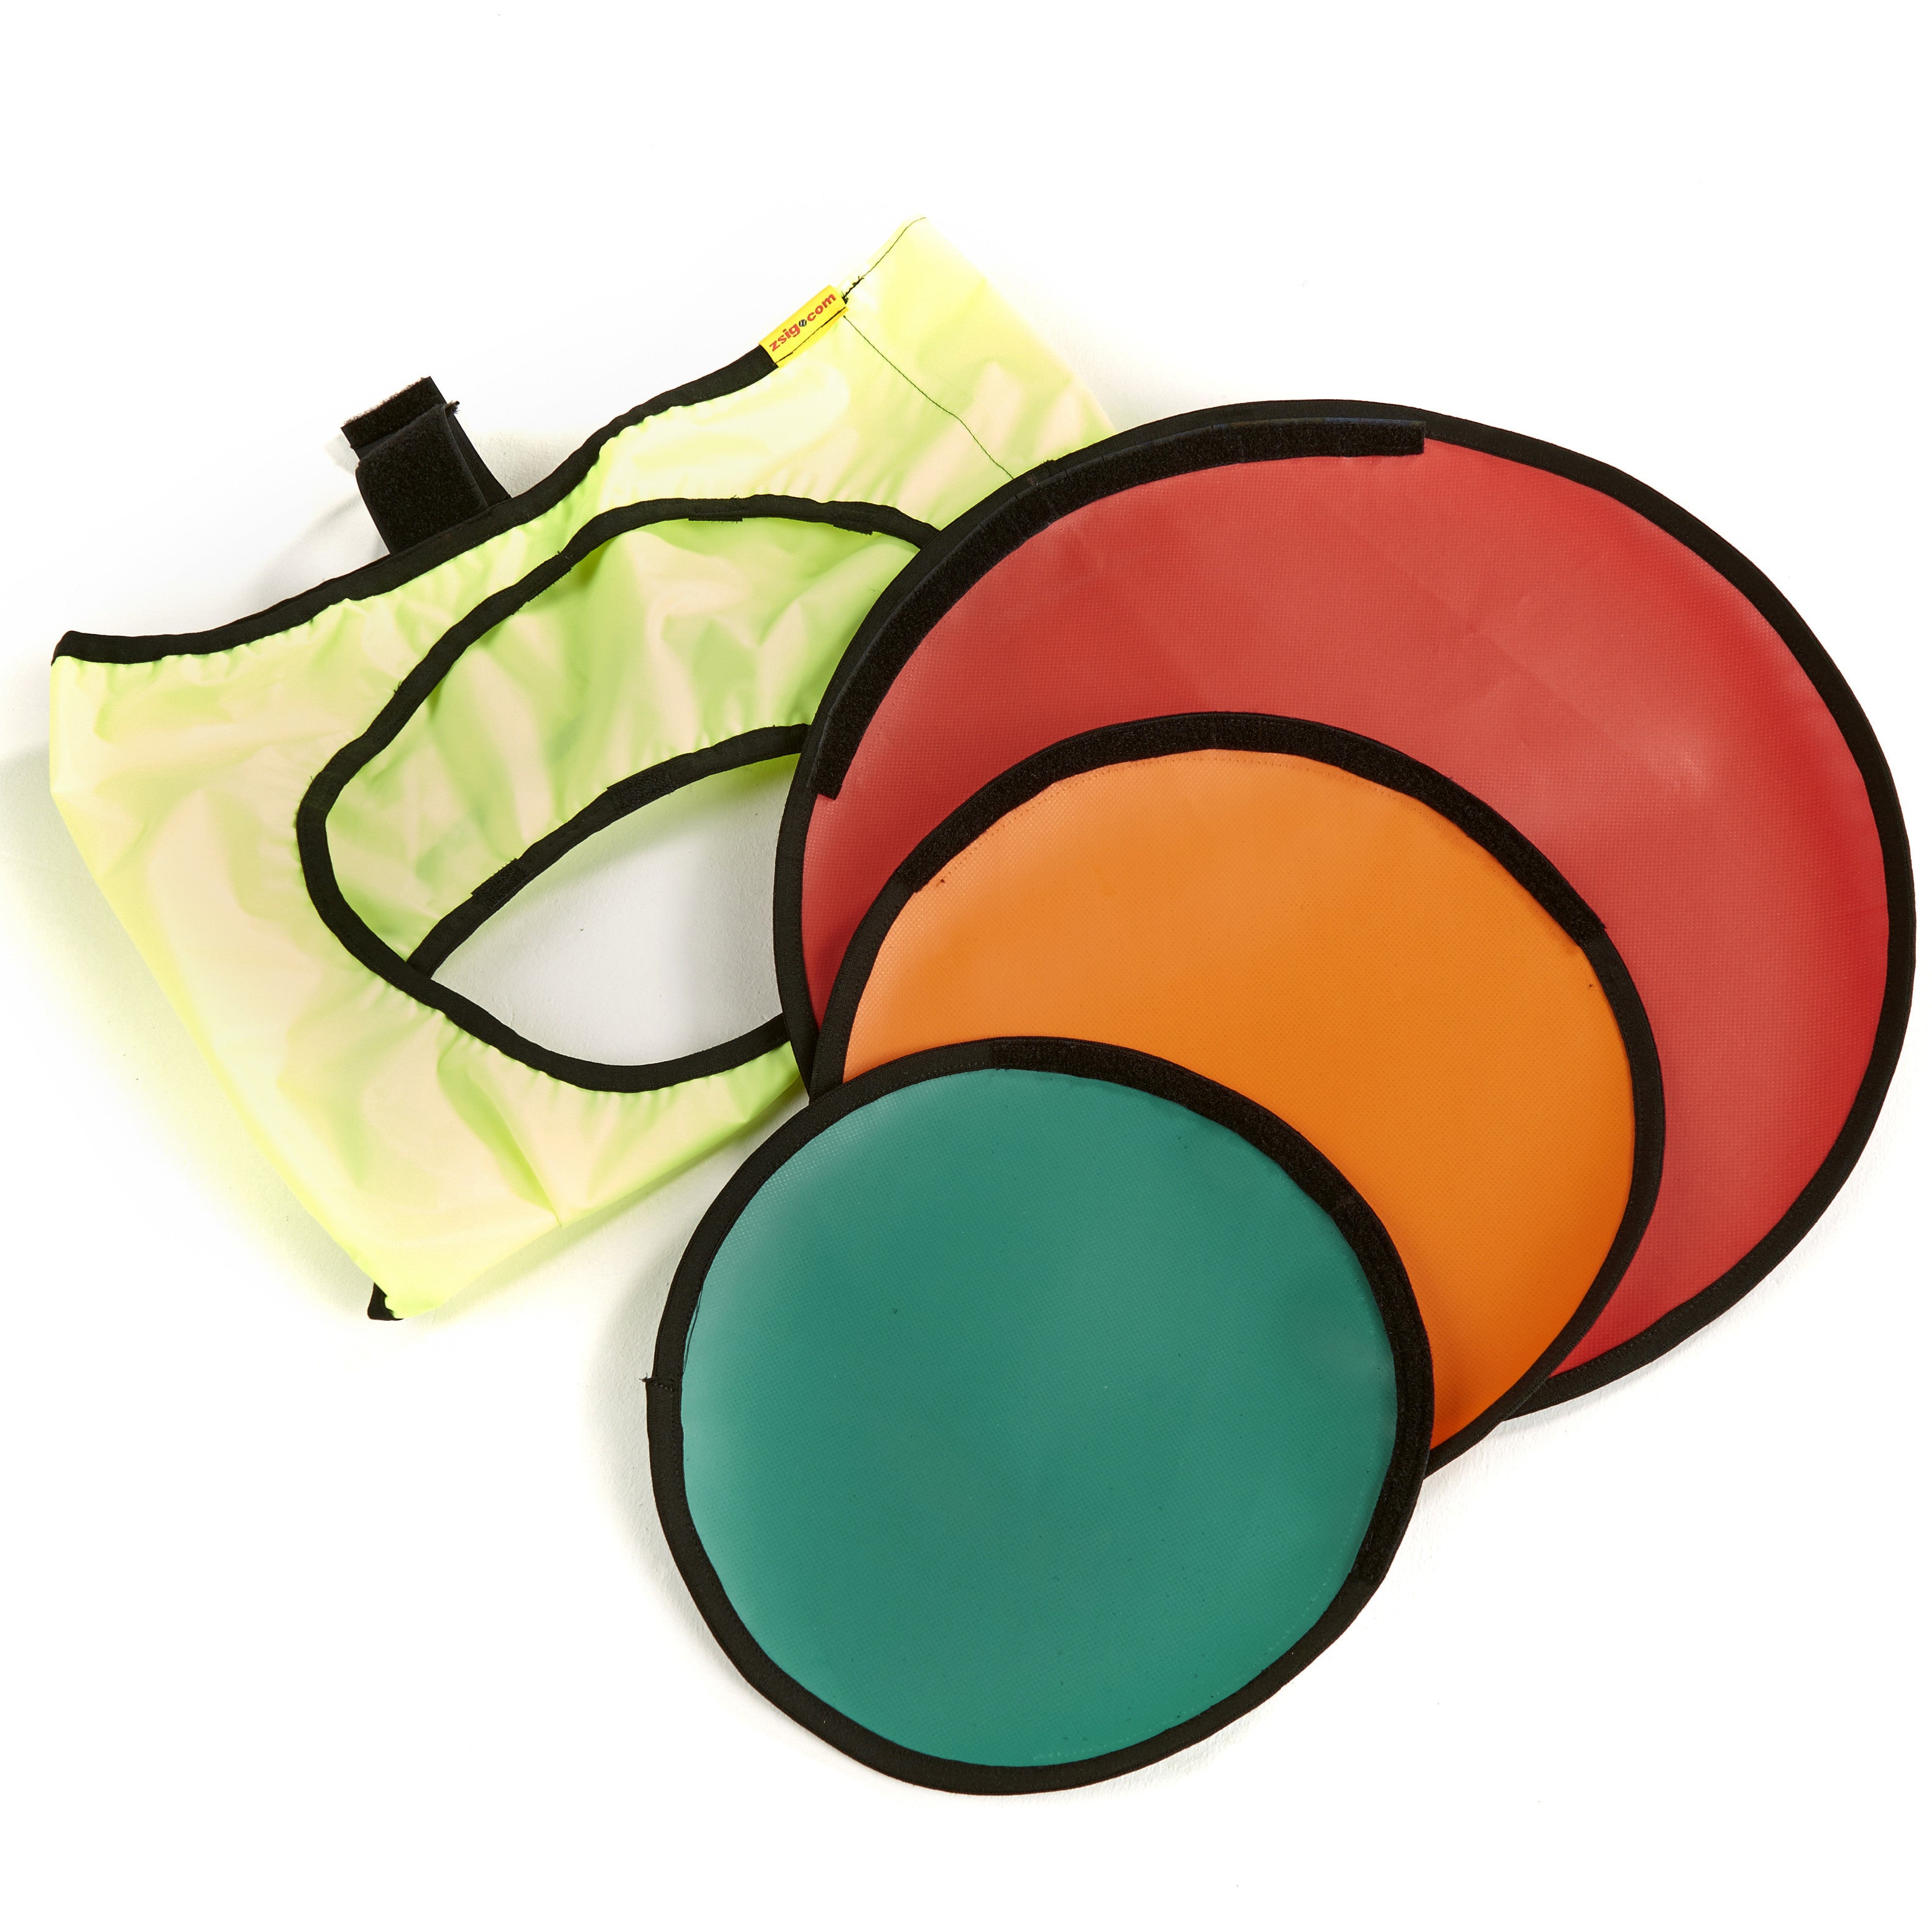 Portable Coaching Aid - Target Trainer folded coloured spot targets.